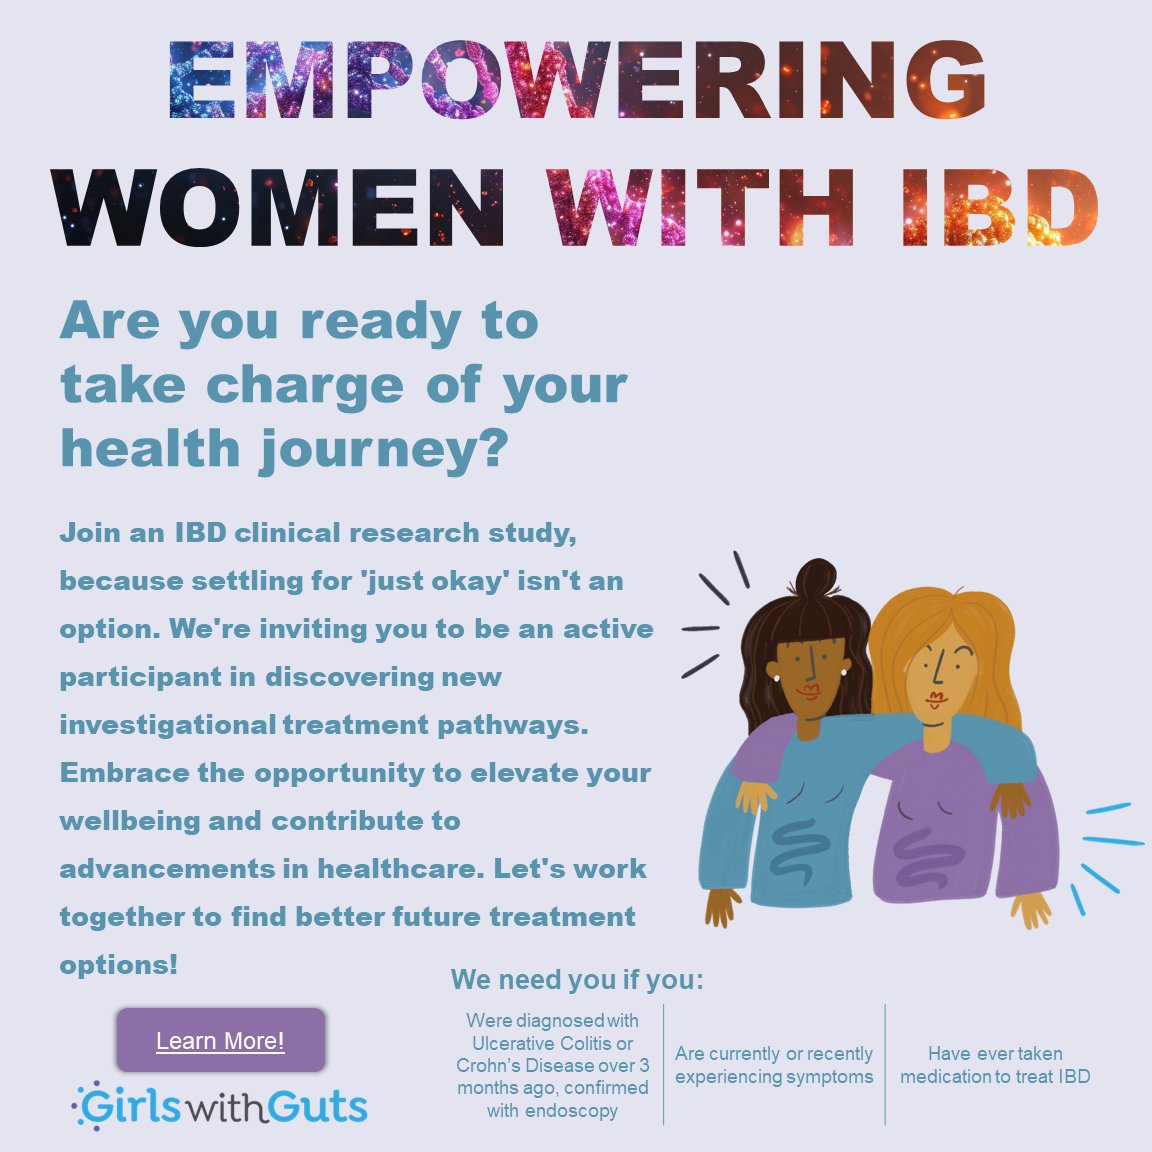 Join an #IBD clinical research study, because settling for 'just okay' shouldn’t be an option. GWG and @Array Insights are inviting you to be an active participant in discovering new investigational treatment pathways. Learn more here: bit.ly/43Ihfvi